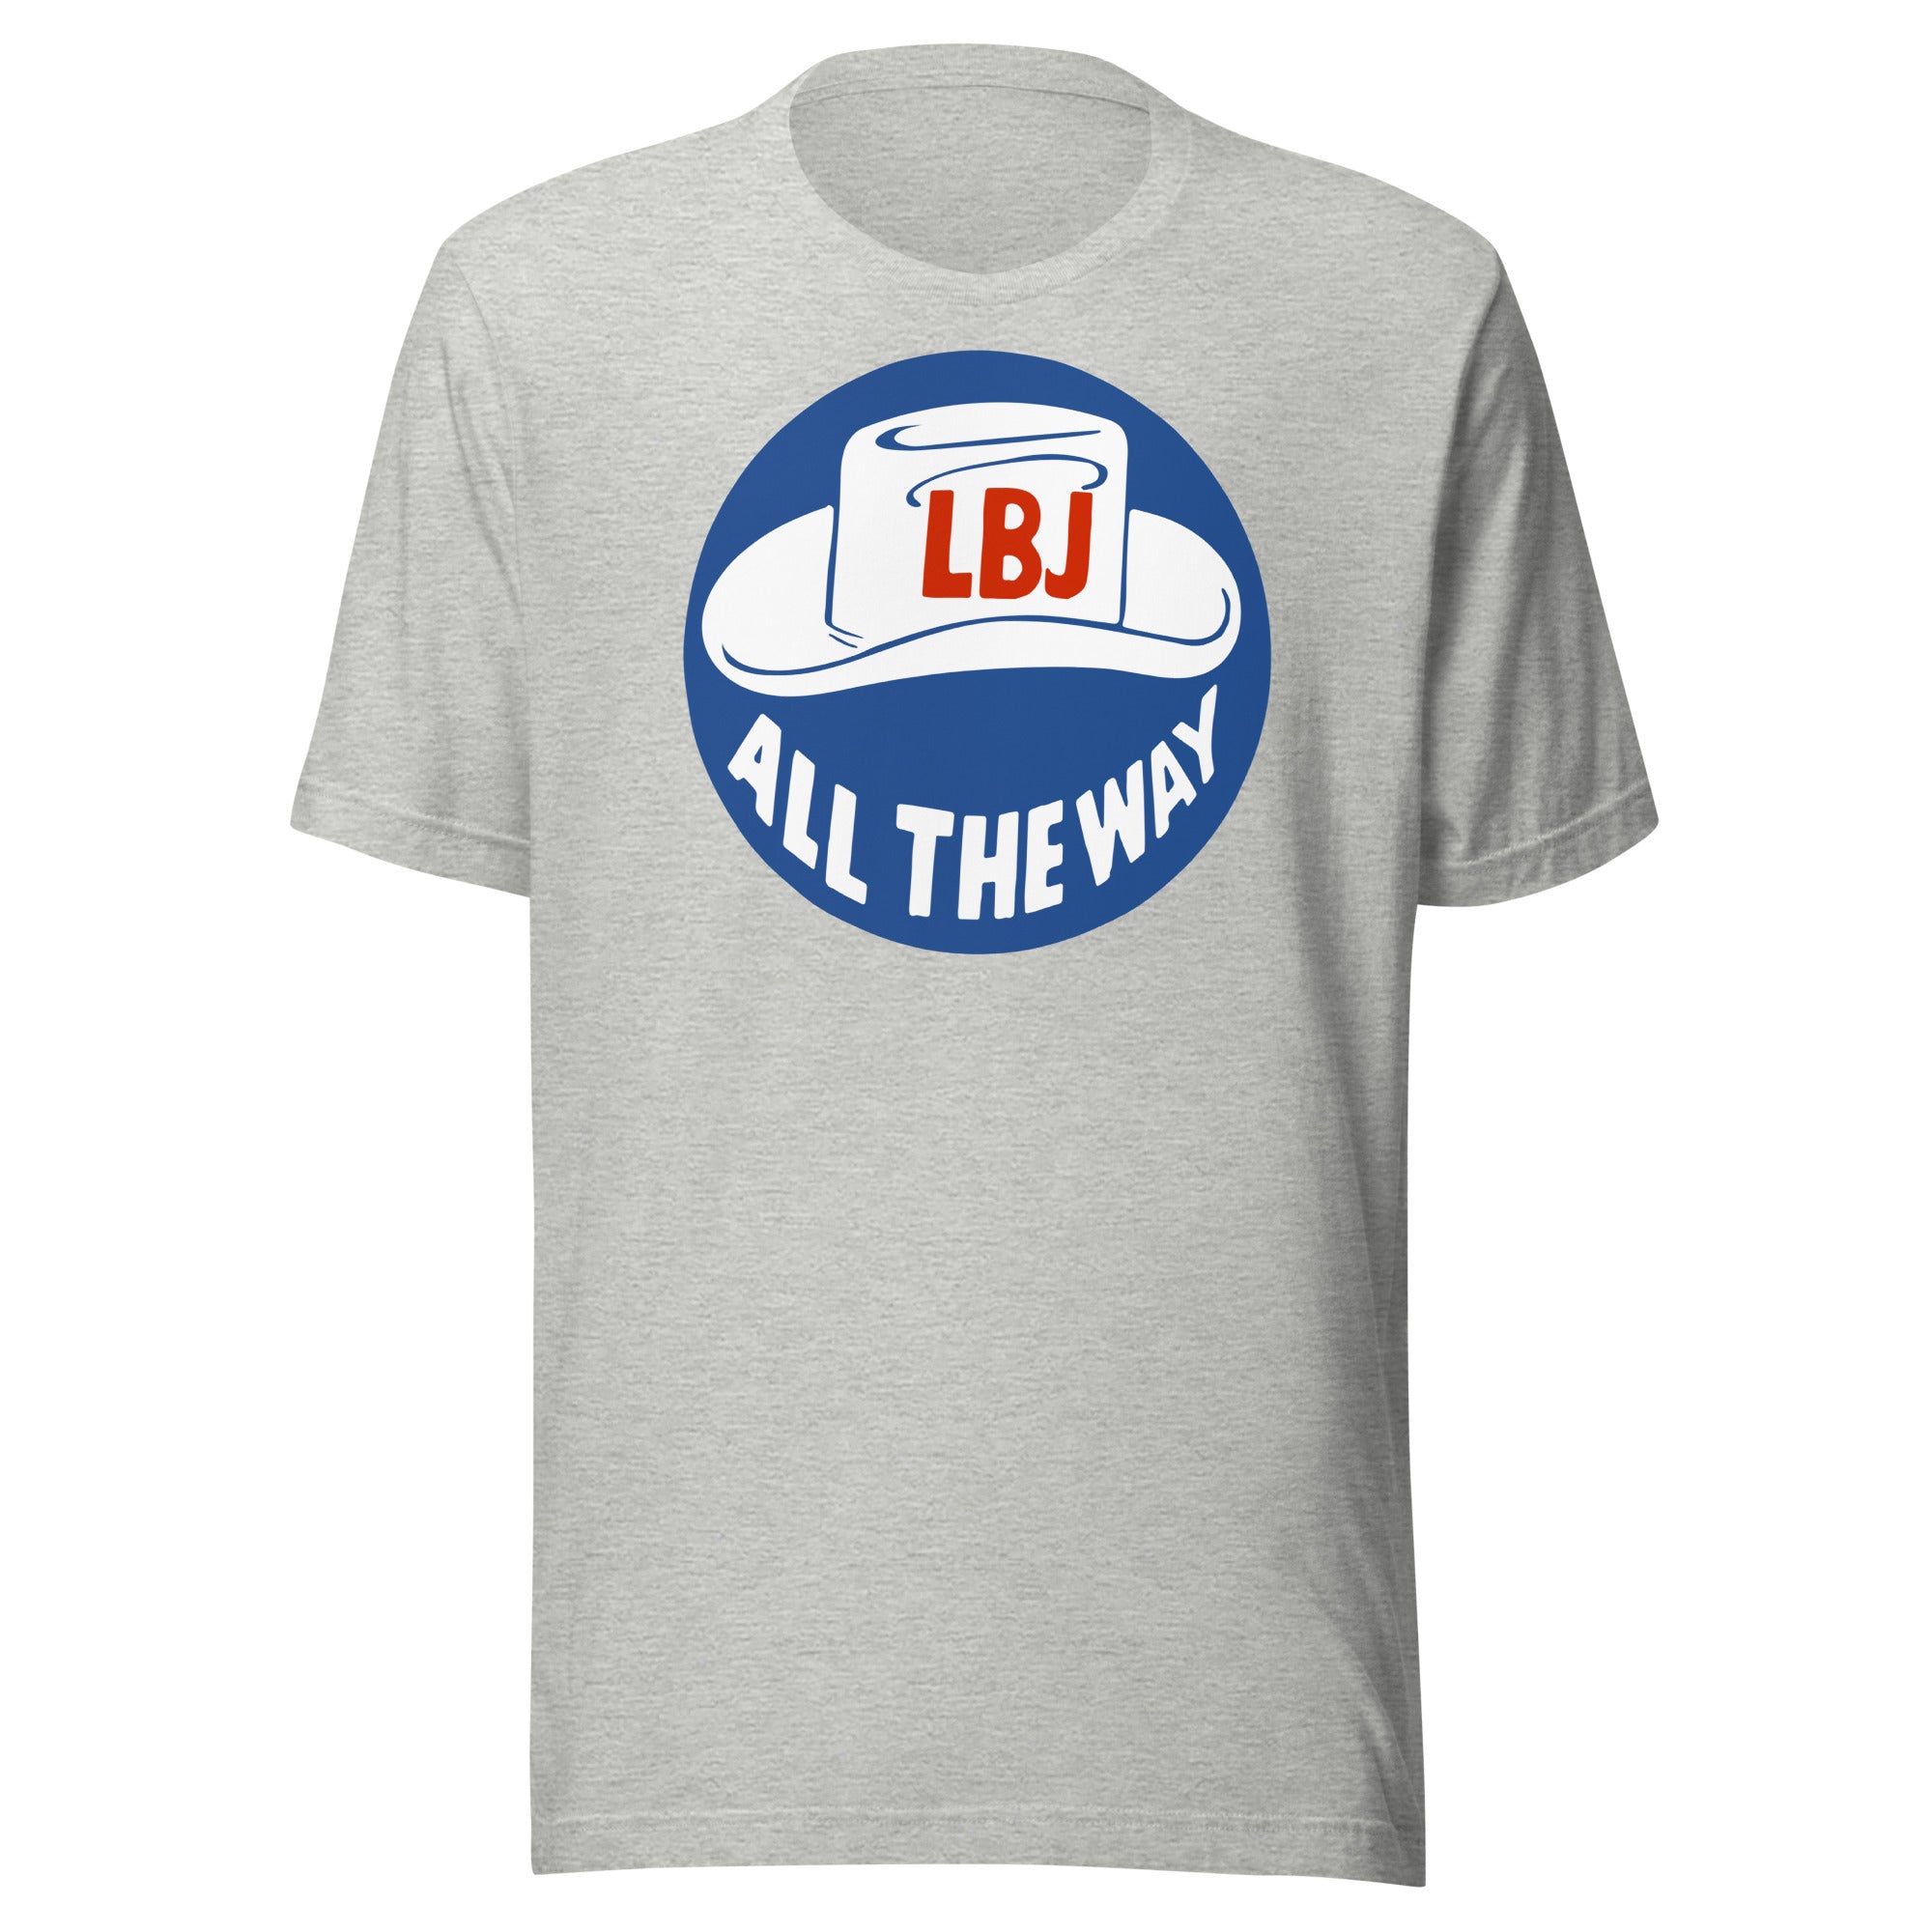 LBJ All the Way 1964 Campaign T-Shirt